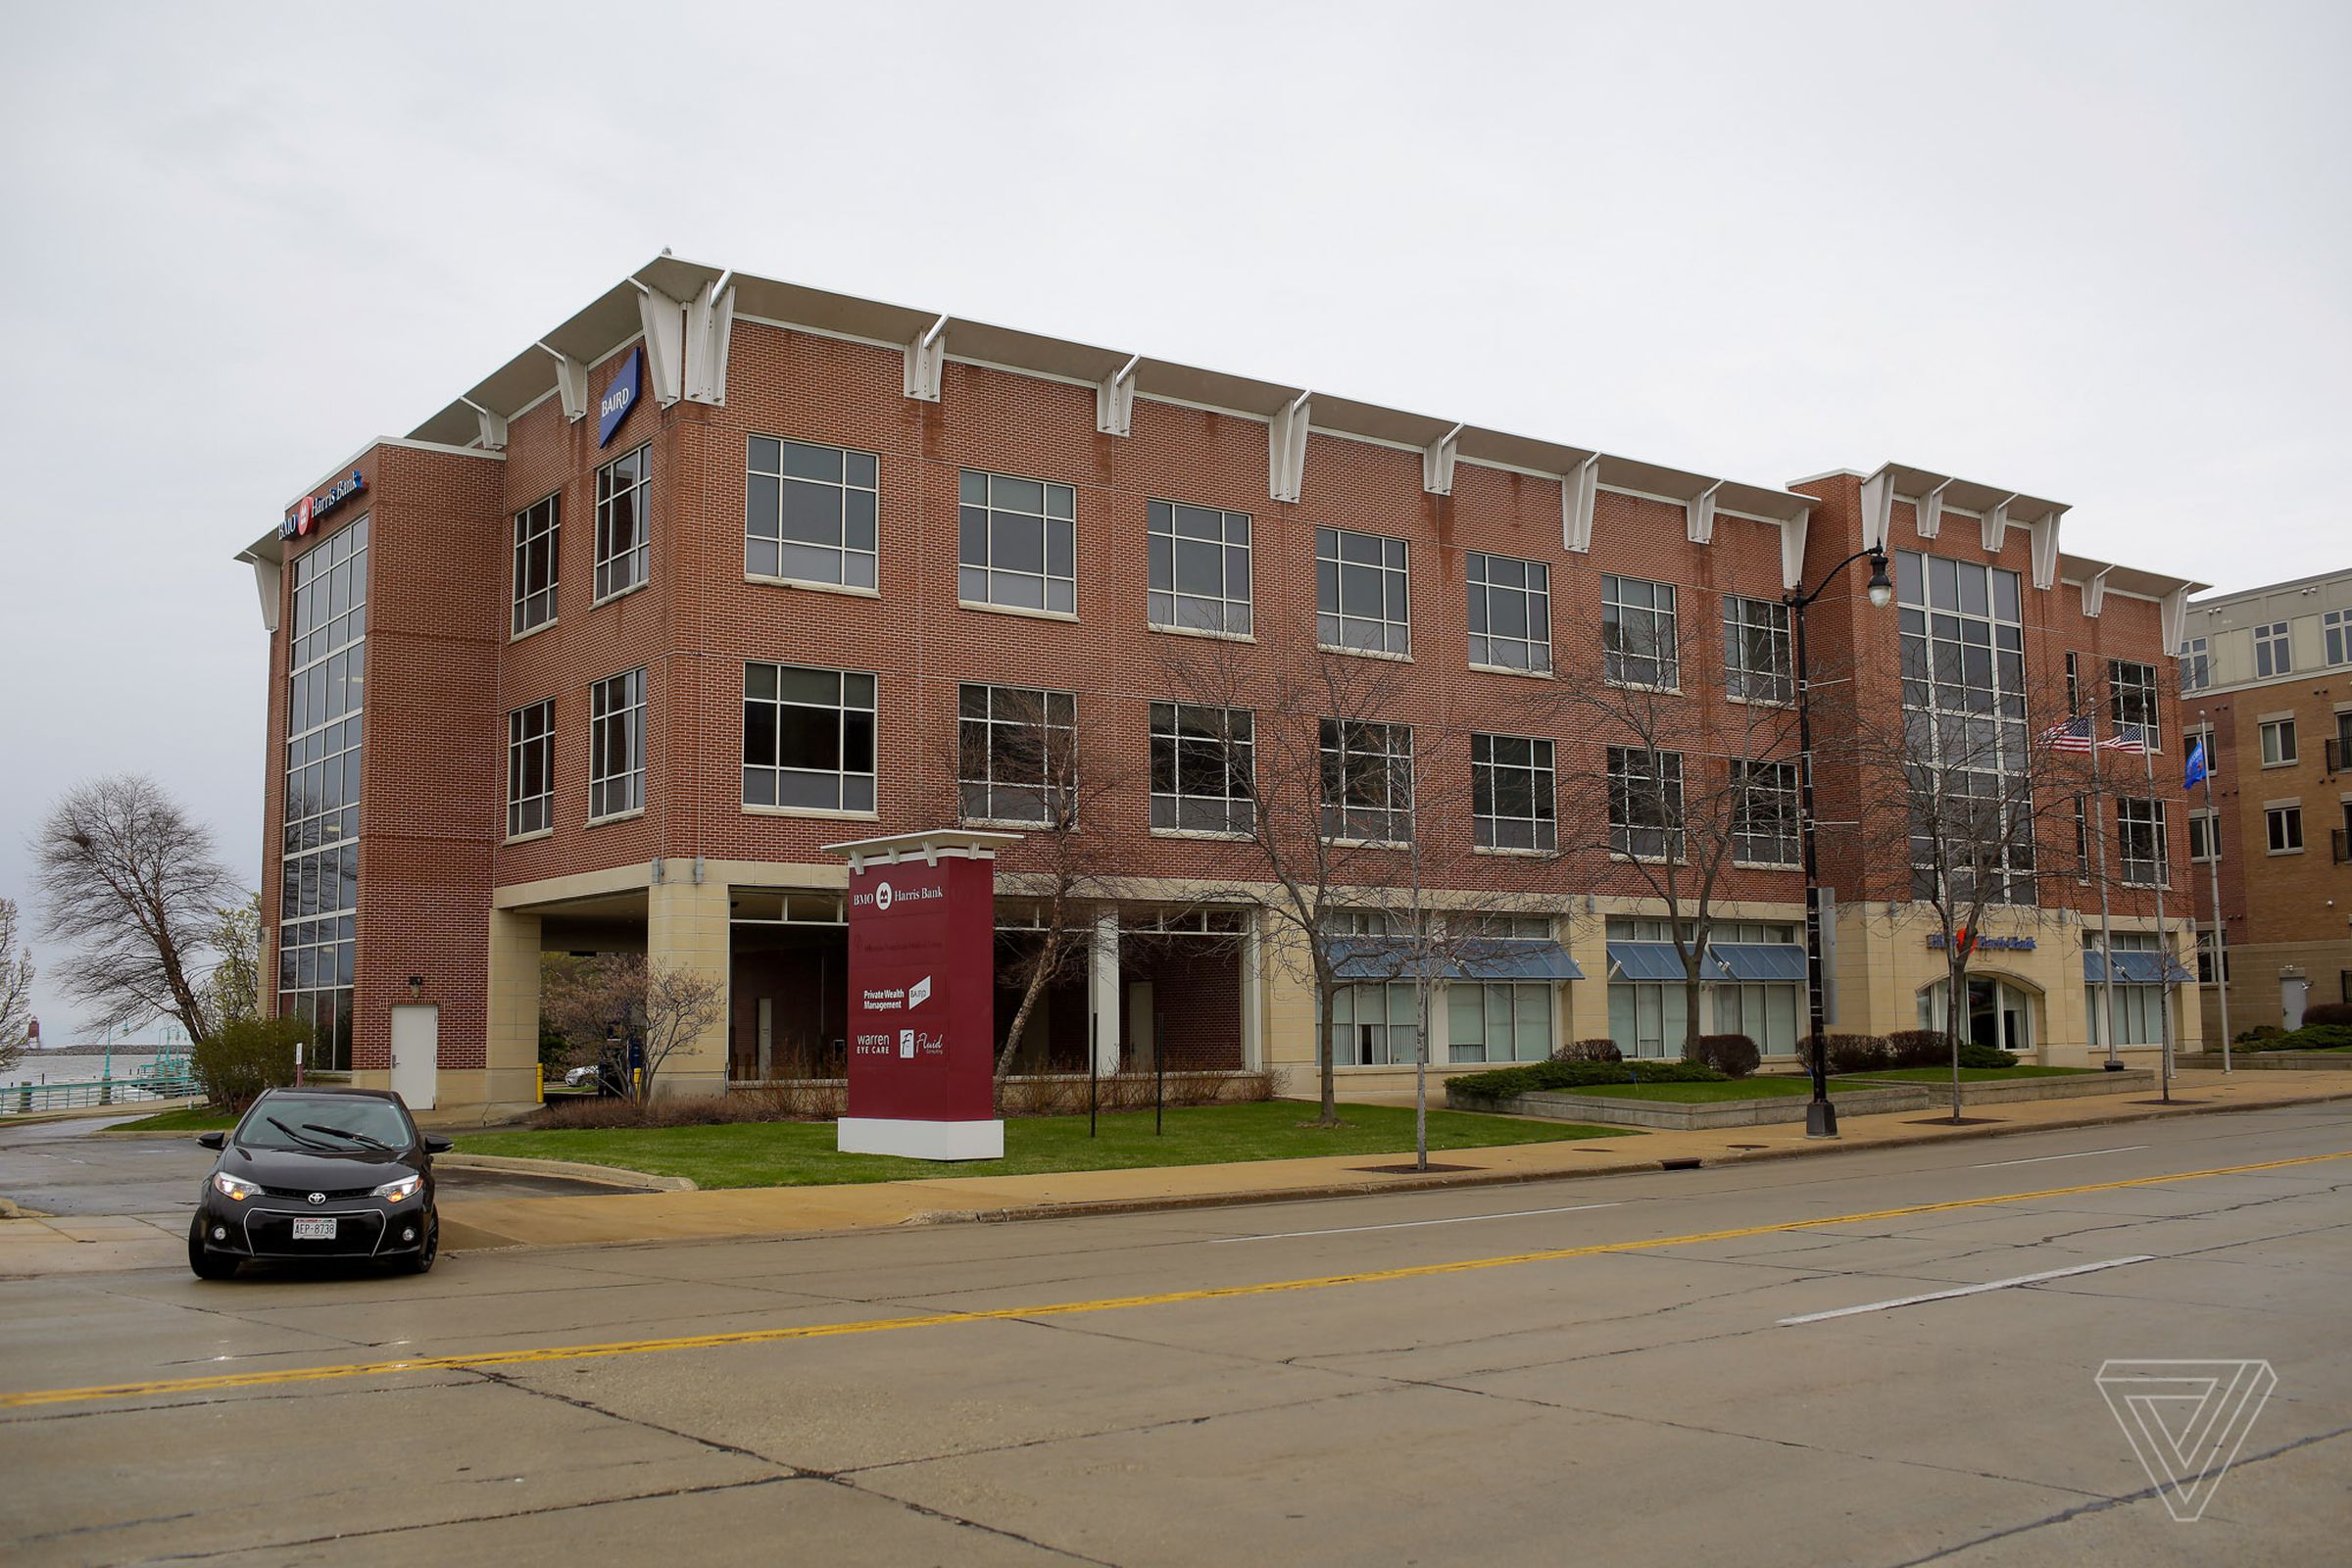 A building in Racine which Foxconn said would become an innovation center. It is currently occupied by a bank and other tenants.